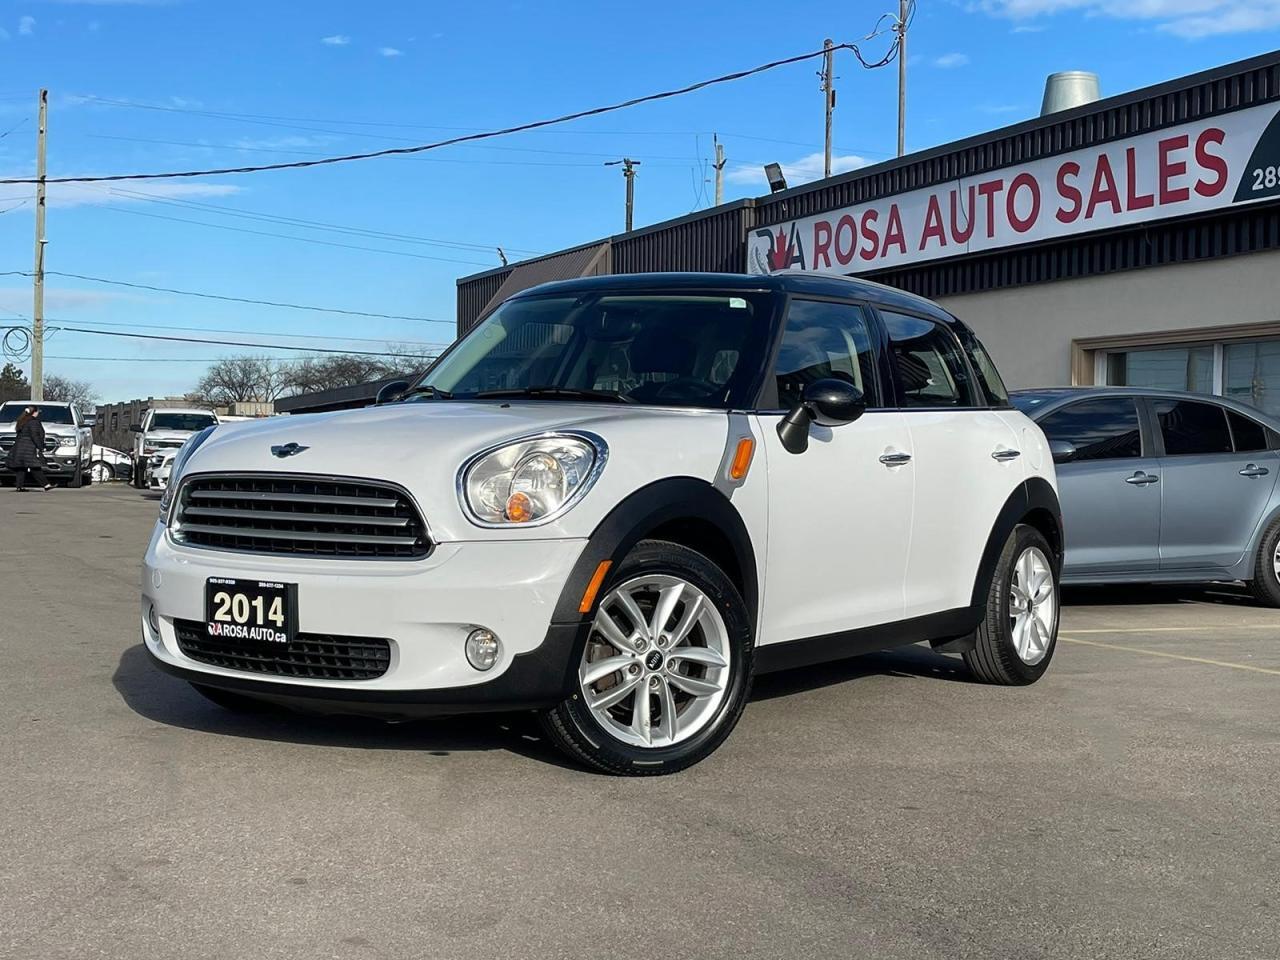 2014 MINI Cooper Countryman AUTO 5DR HATCH LOW KM PANORAMIC ROOF B-TOOTH